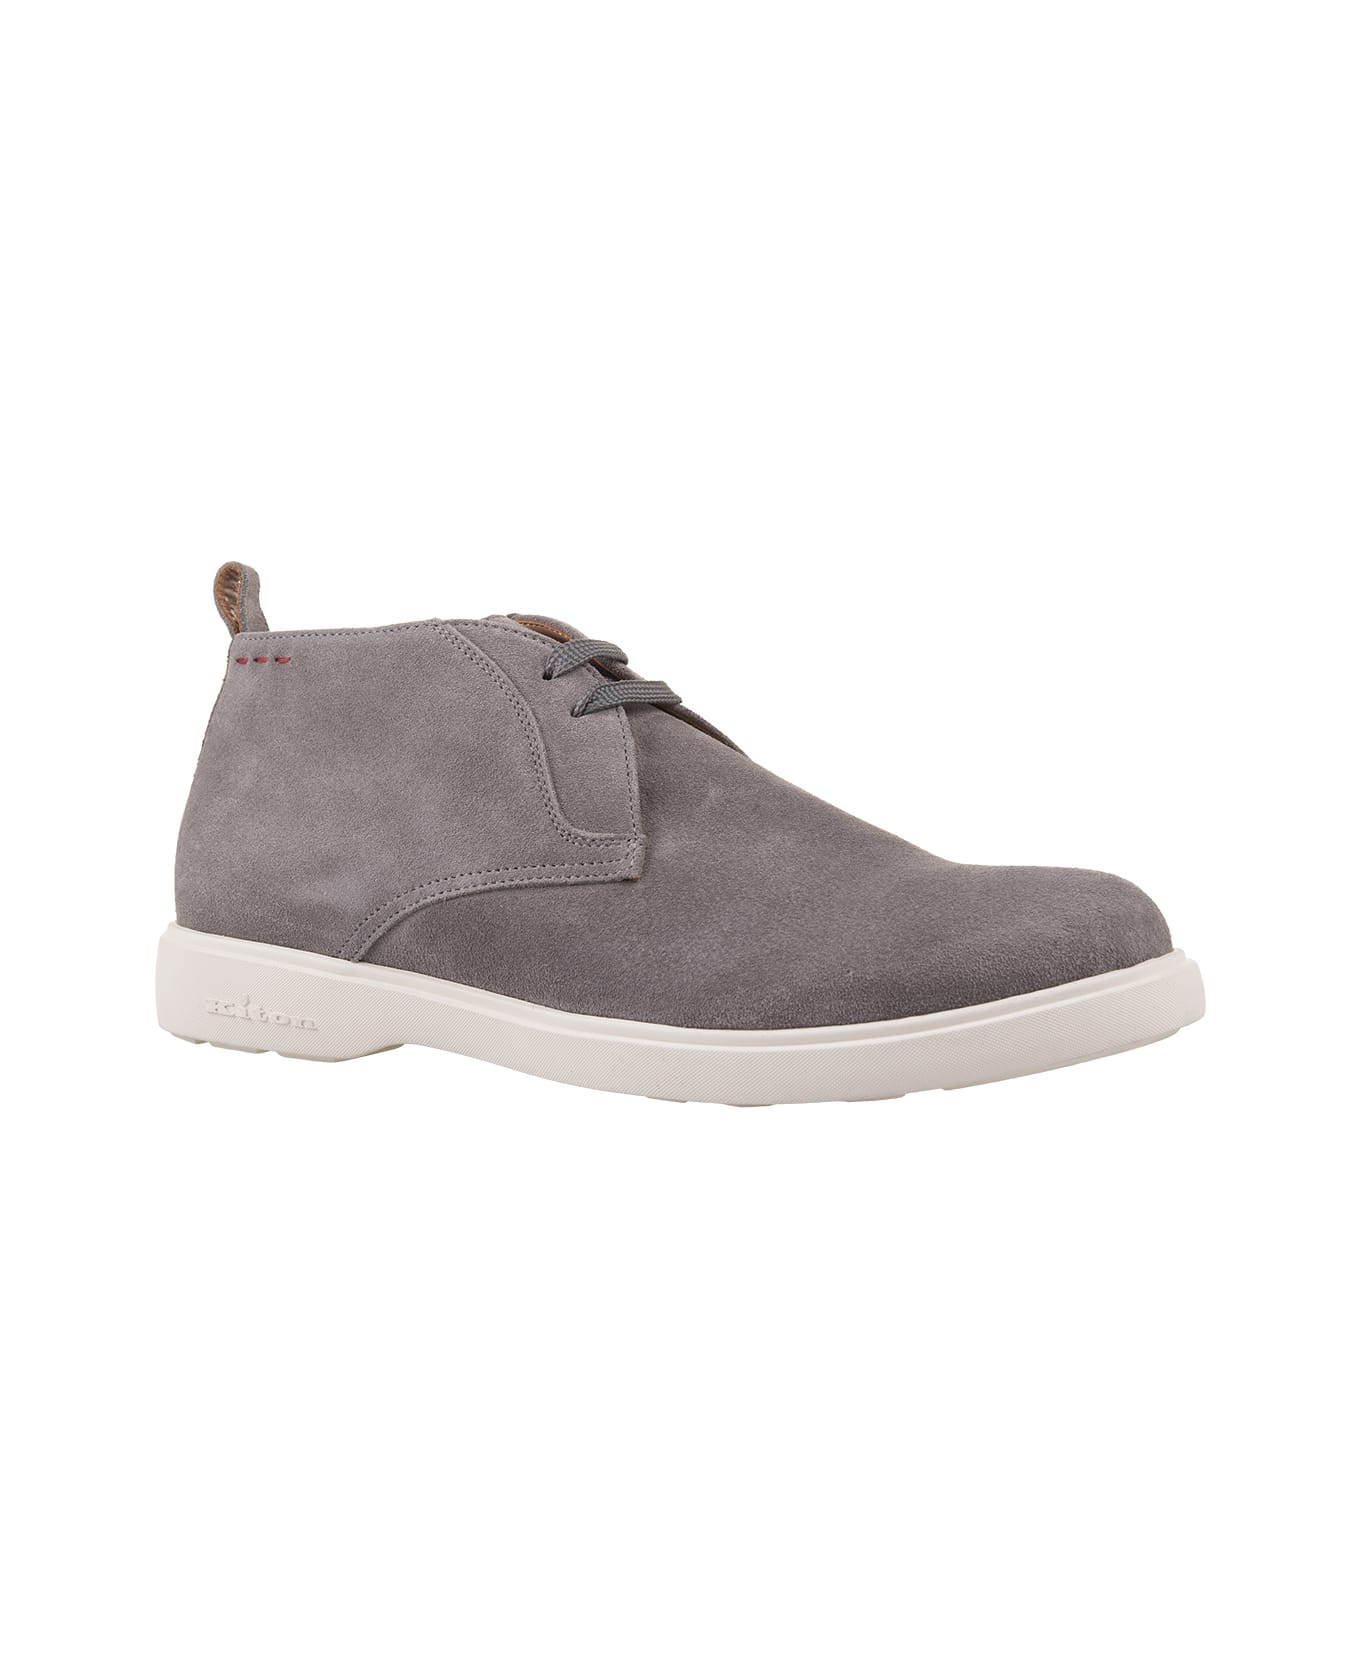 Kiton Grey Suede Laced Leather Ankle Boots - Grey